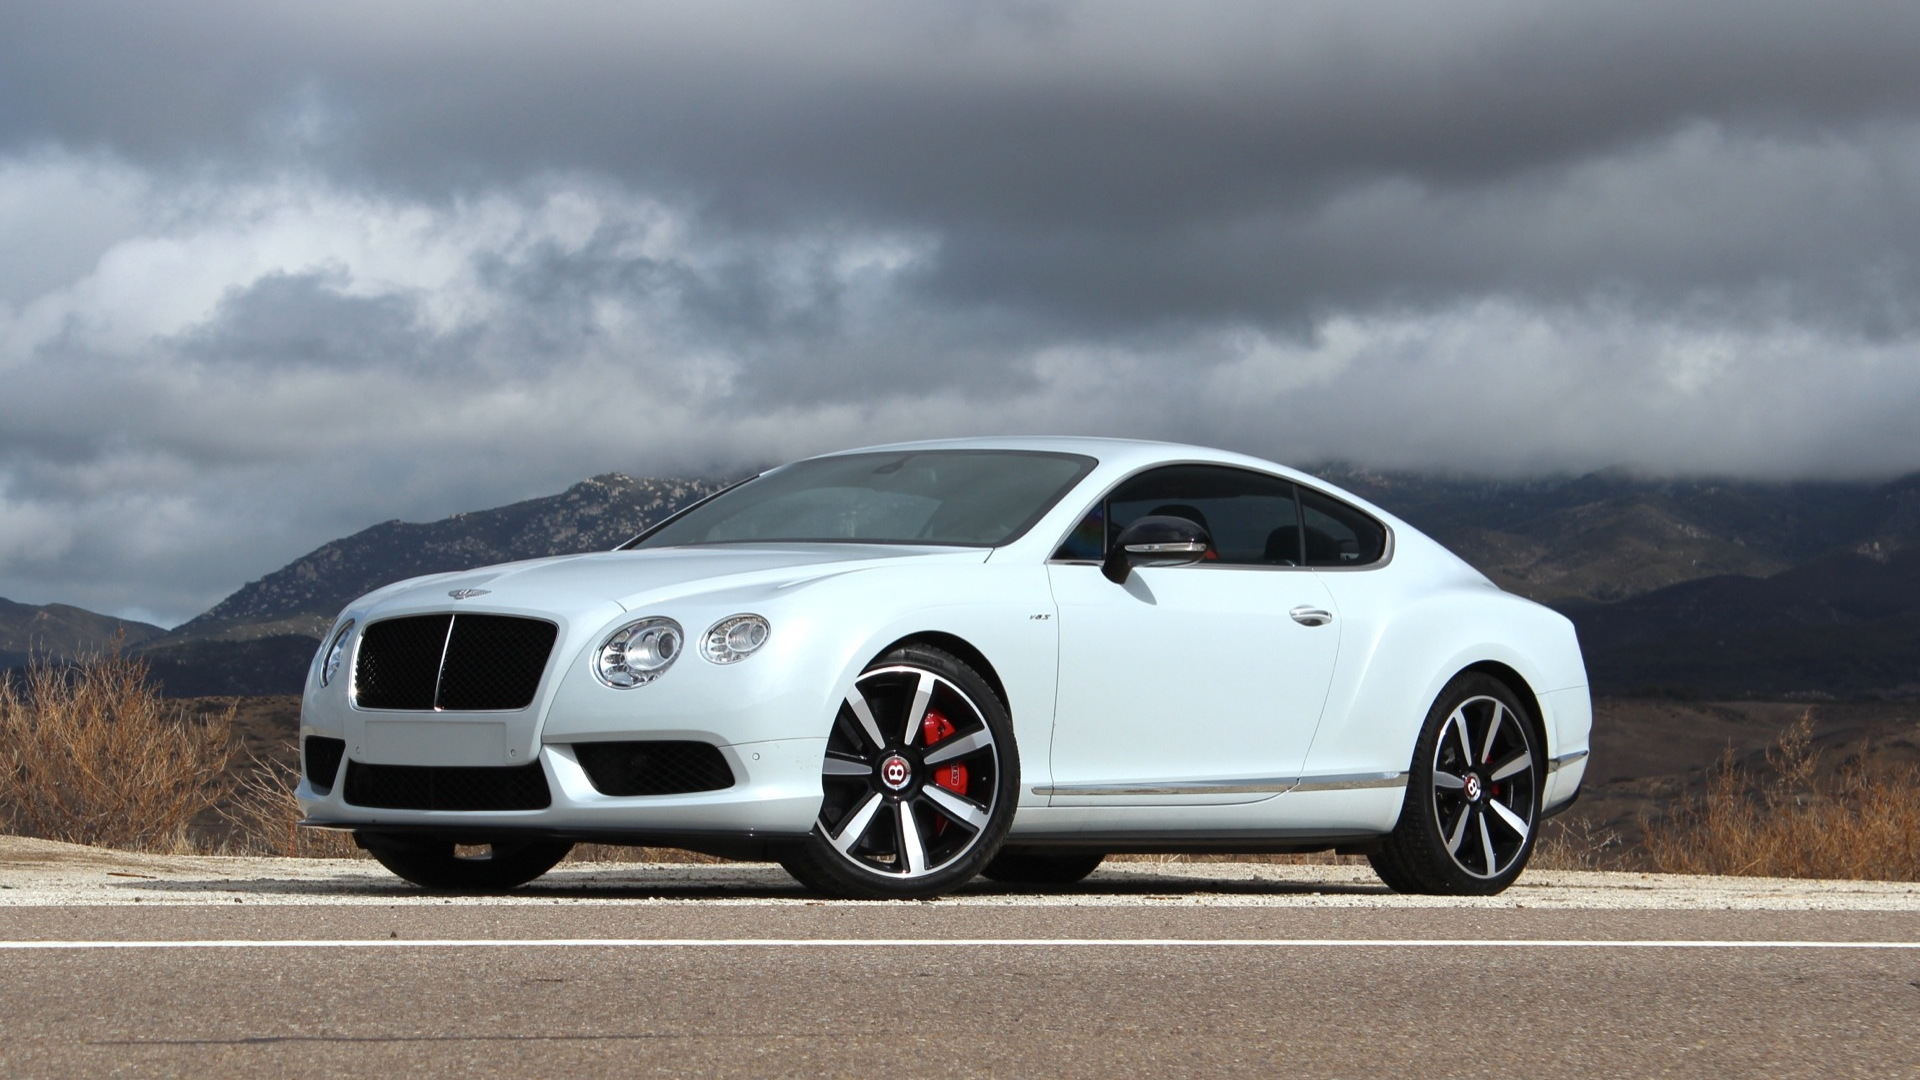 2014 Bentley Continental GT V8 S  -  First Drive, California, February 2014